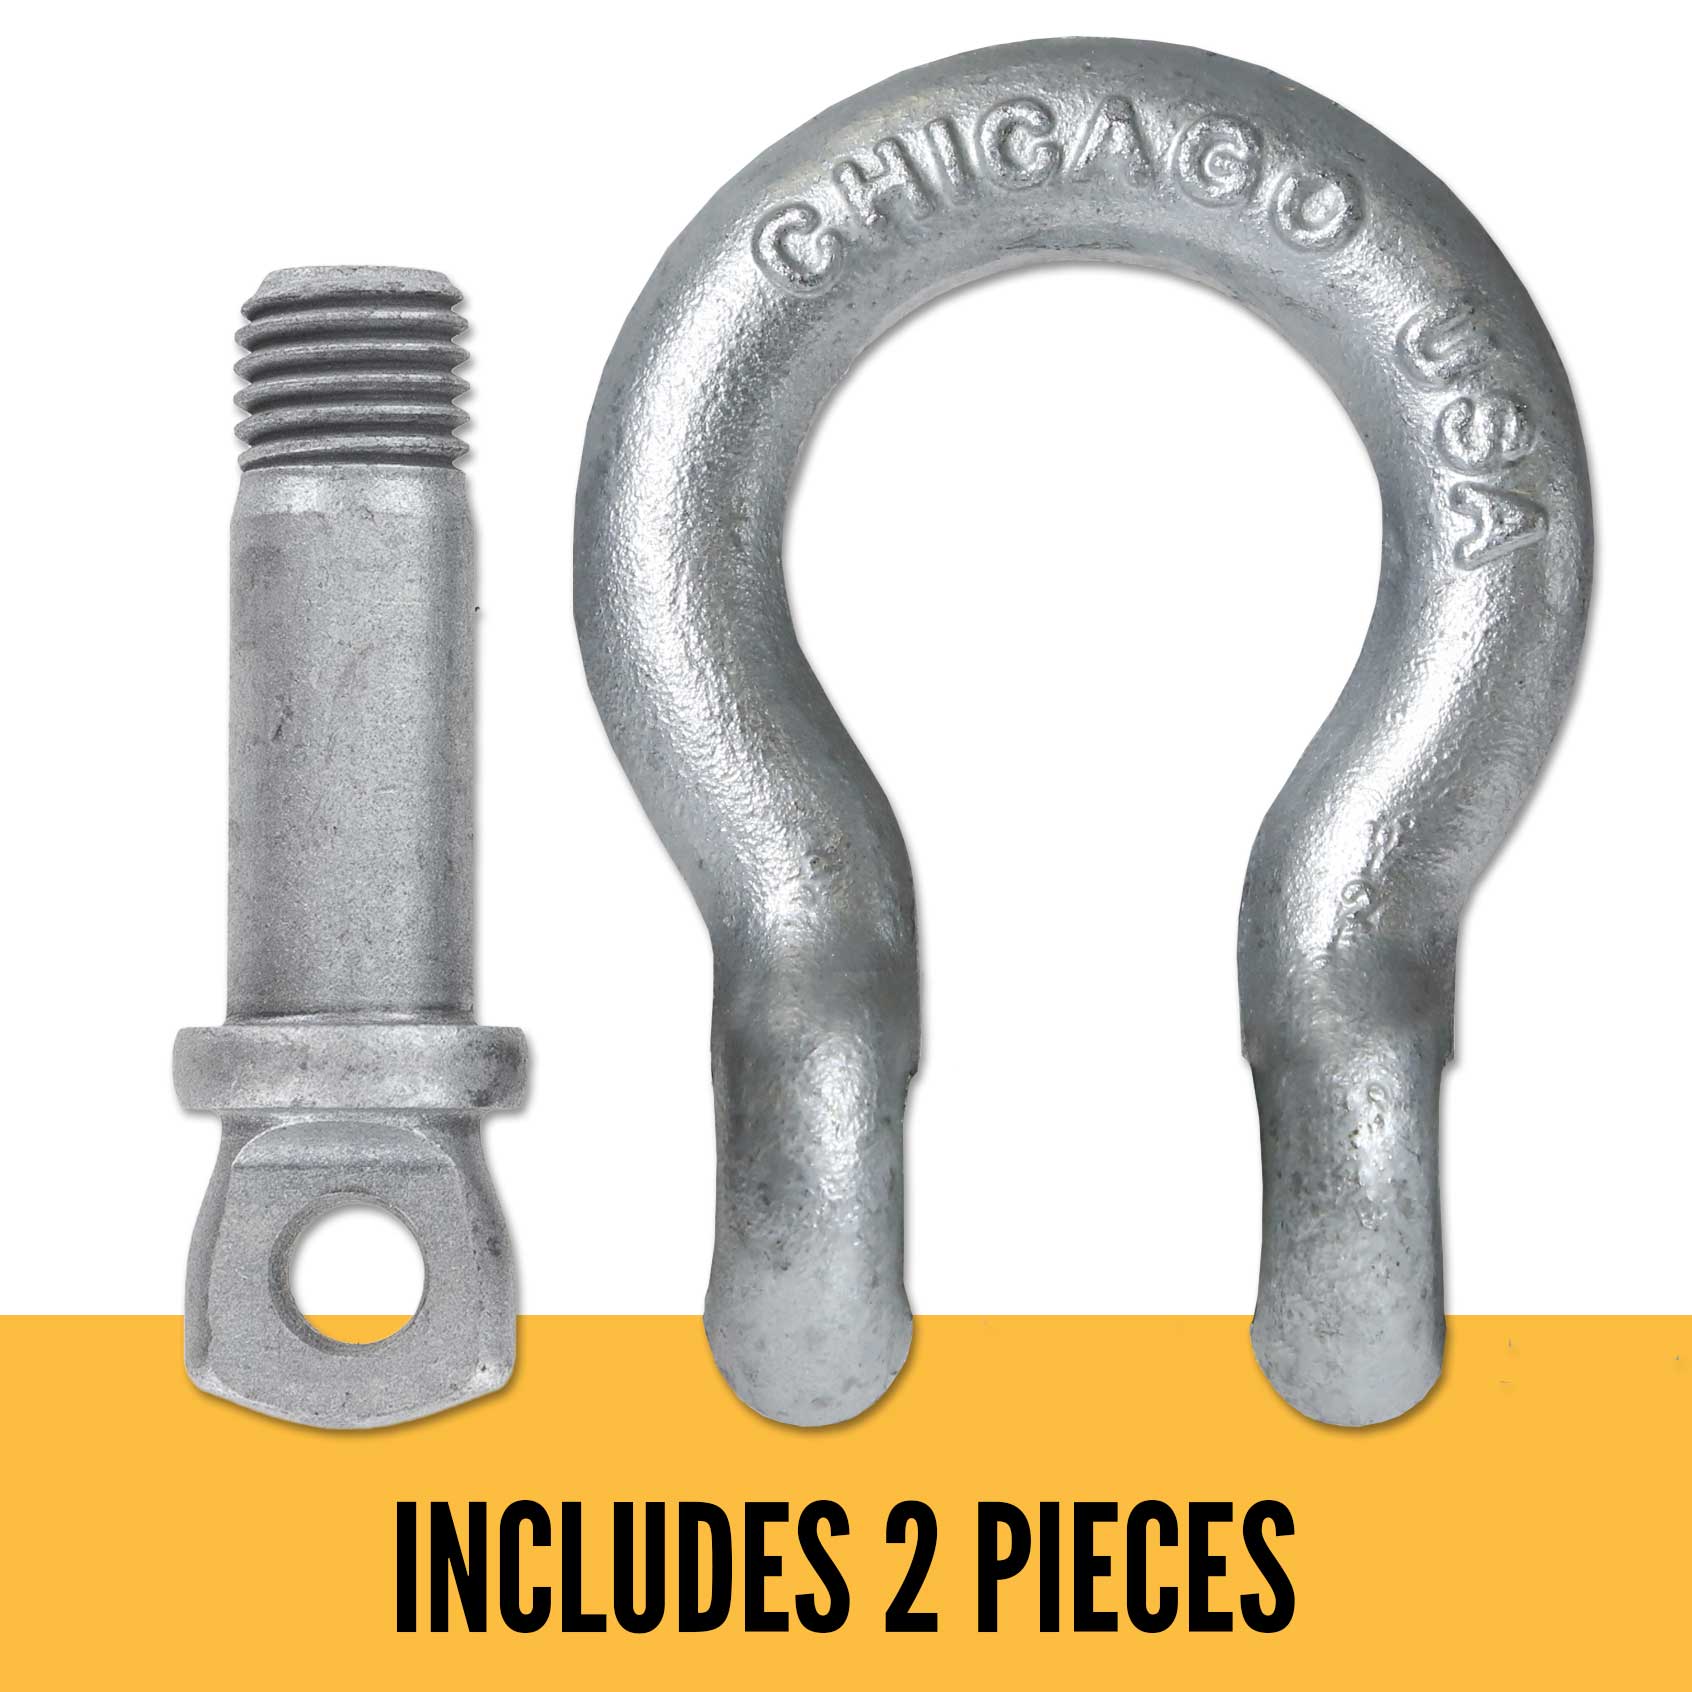 Screw Pin Anchor Shackle - Chicago Hardware - 1-1/2" Galvanized Steel - 17 Ton parts of a shackle